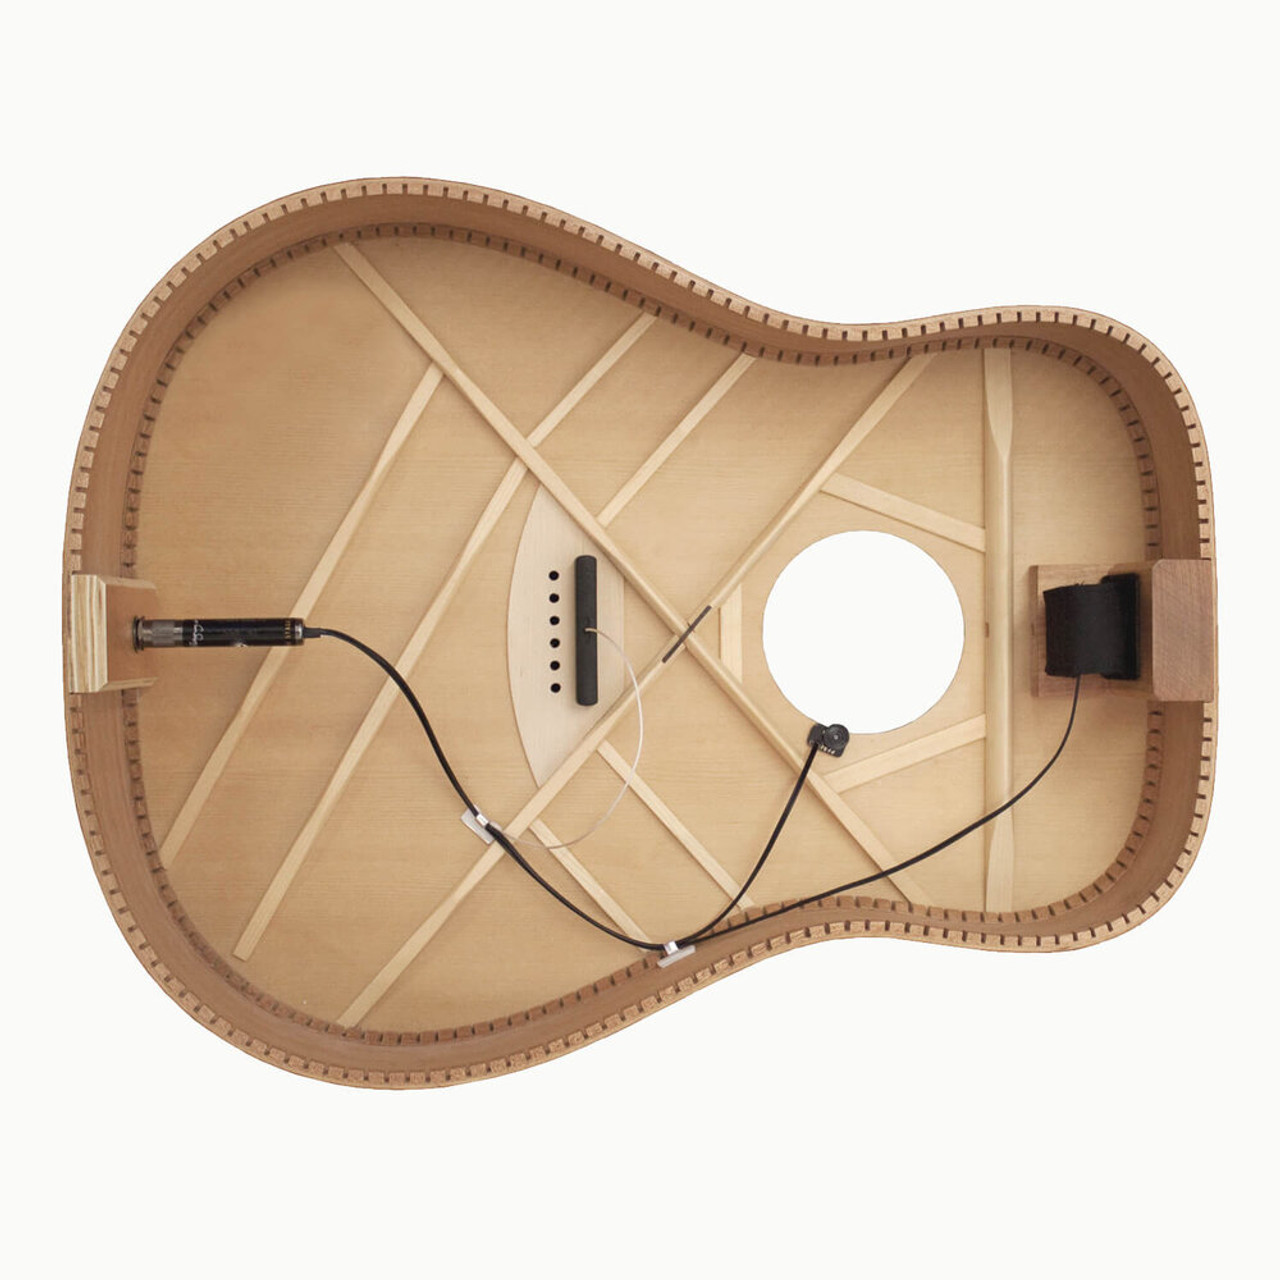 LR Baggs iBeam Active Acoustic Guitar Pickup System